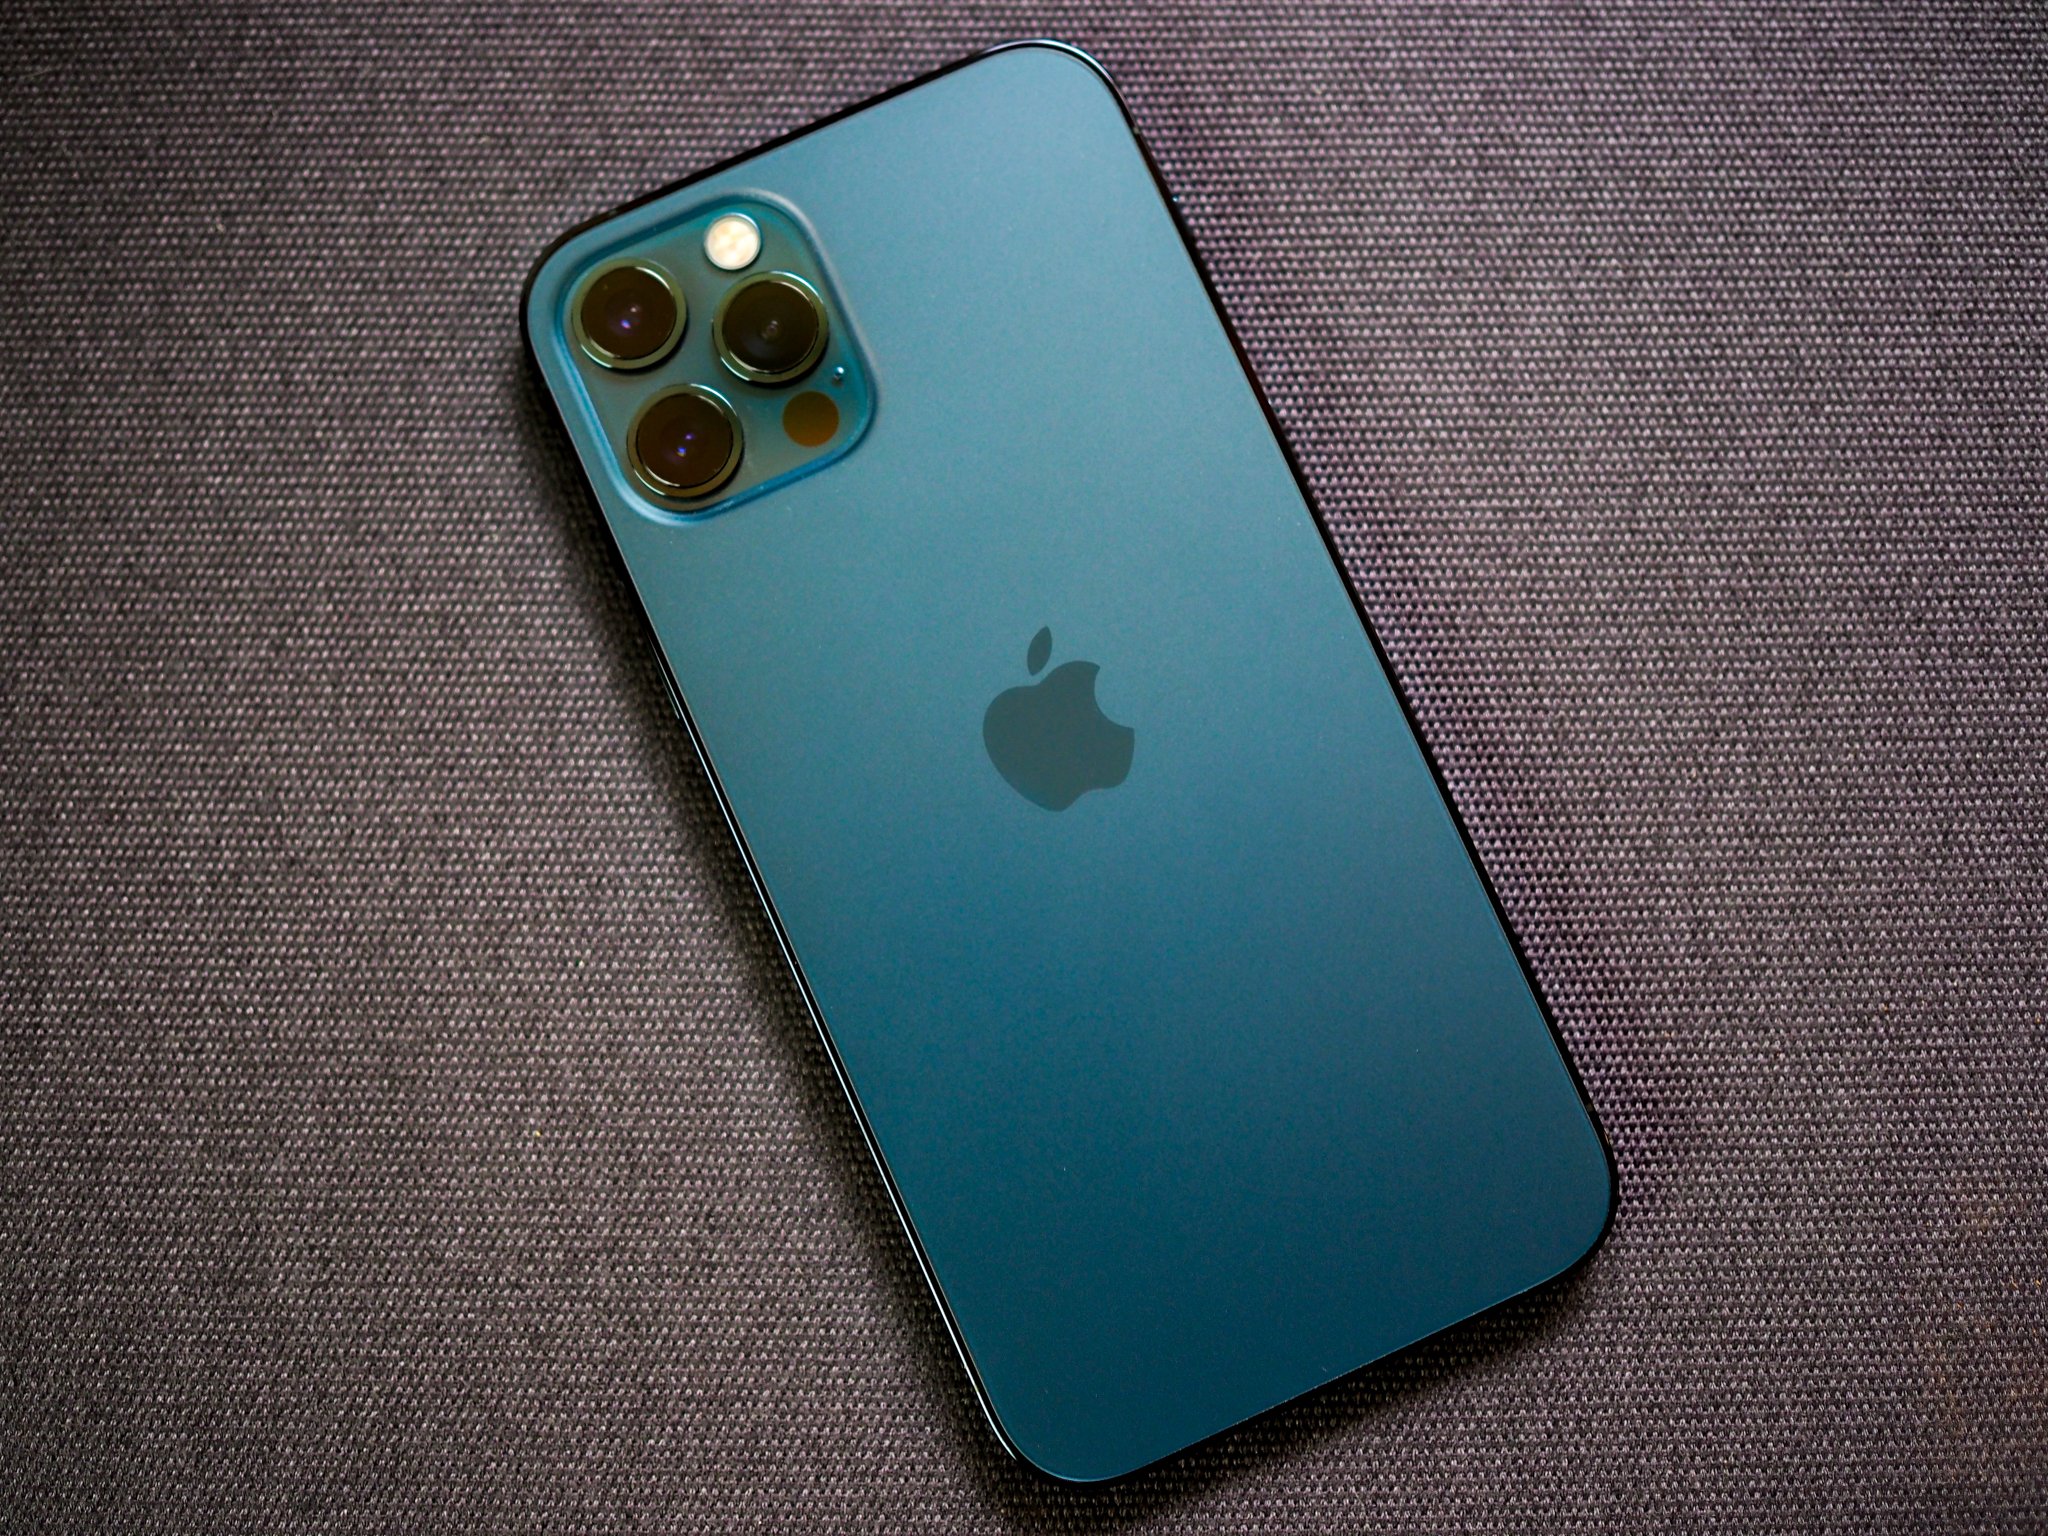 iPhone 12 Pro colors: Which should you buy?